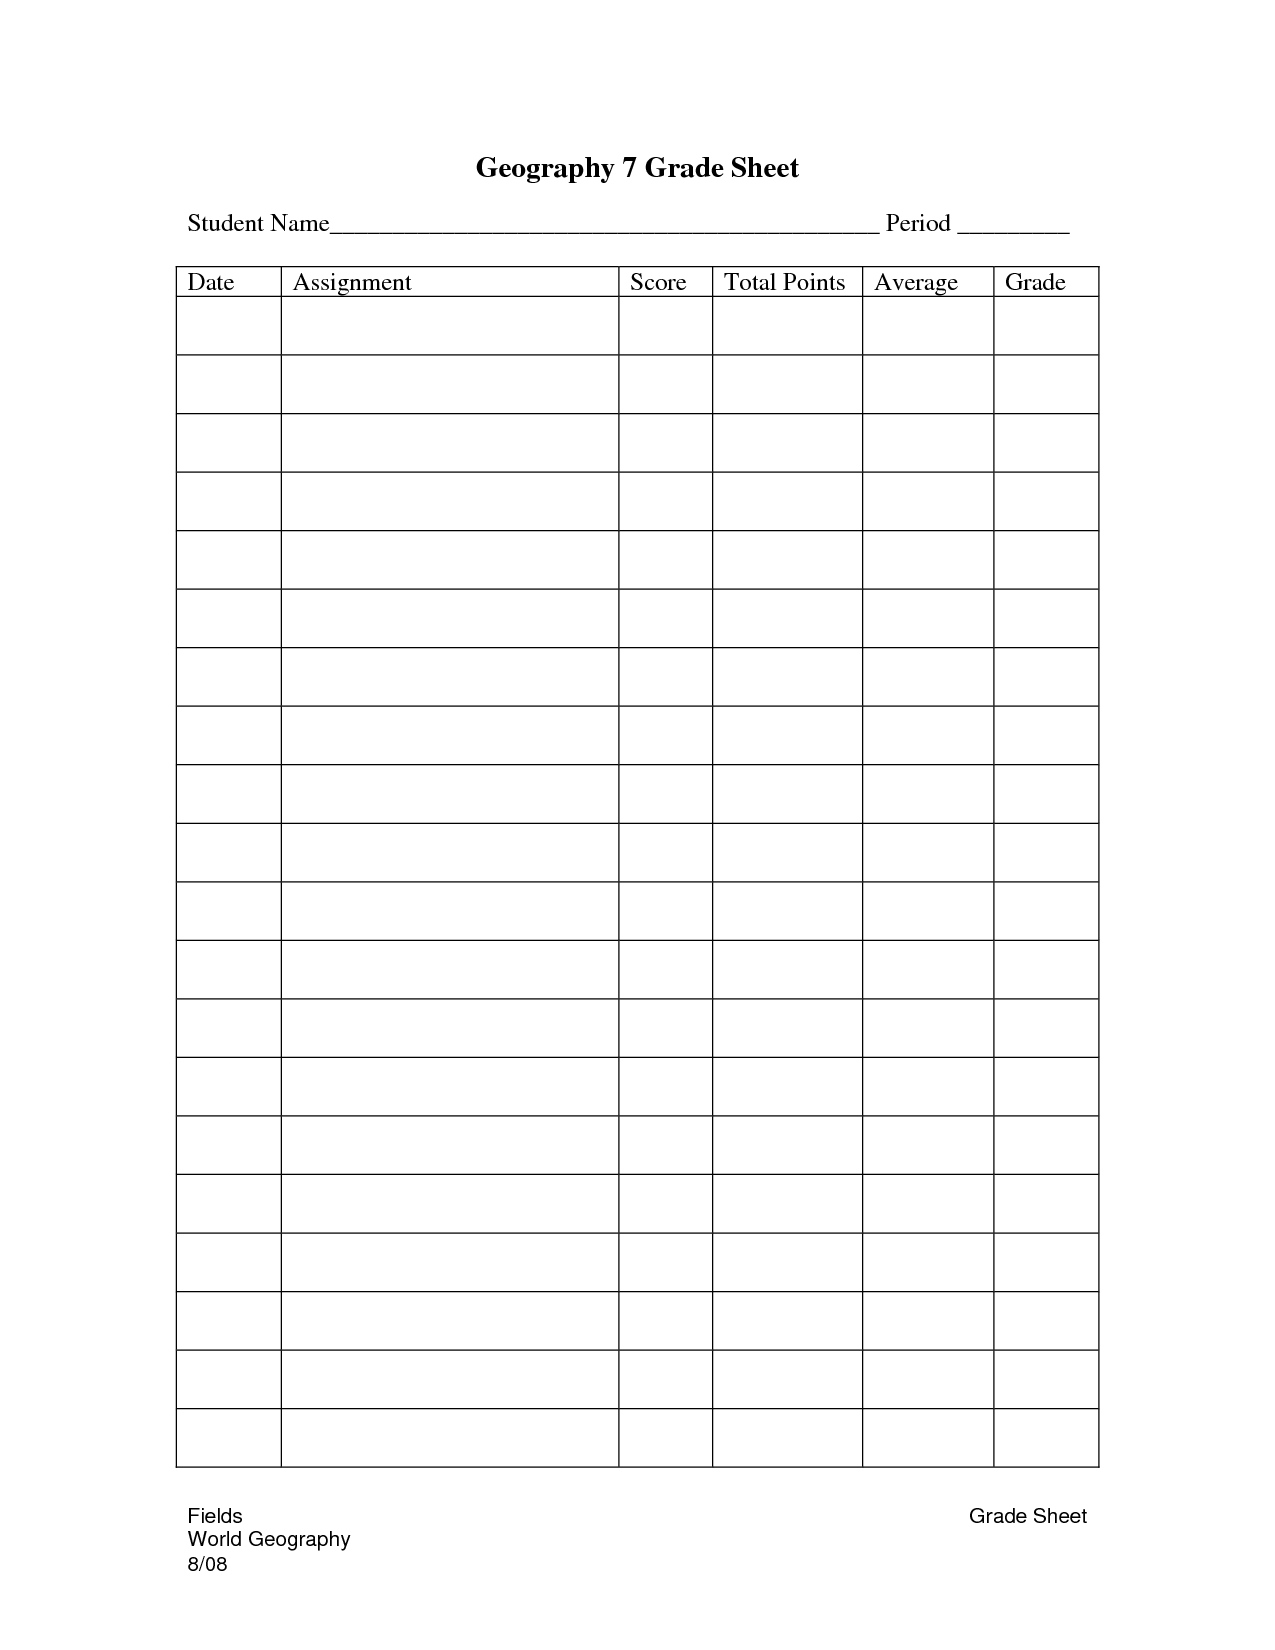 4-best-images-of-student-grade-sheet-template-printable-student-grade